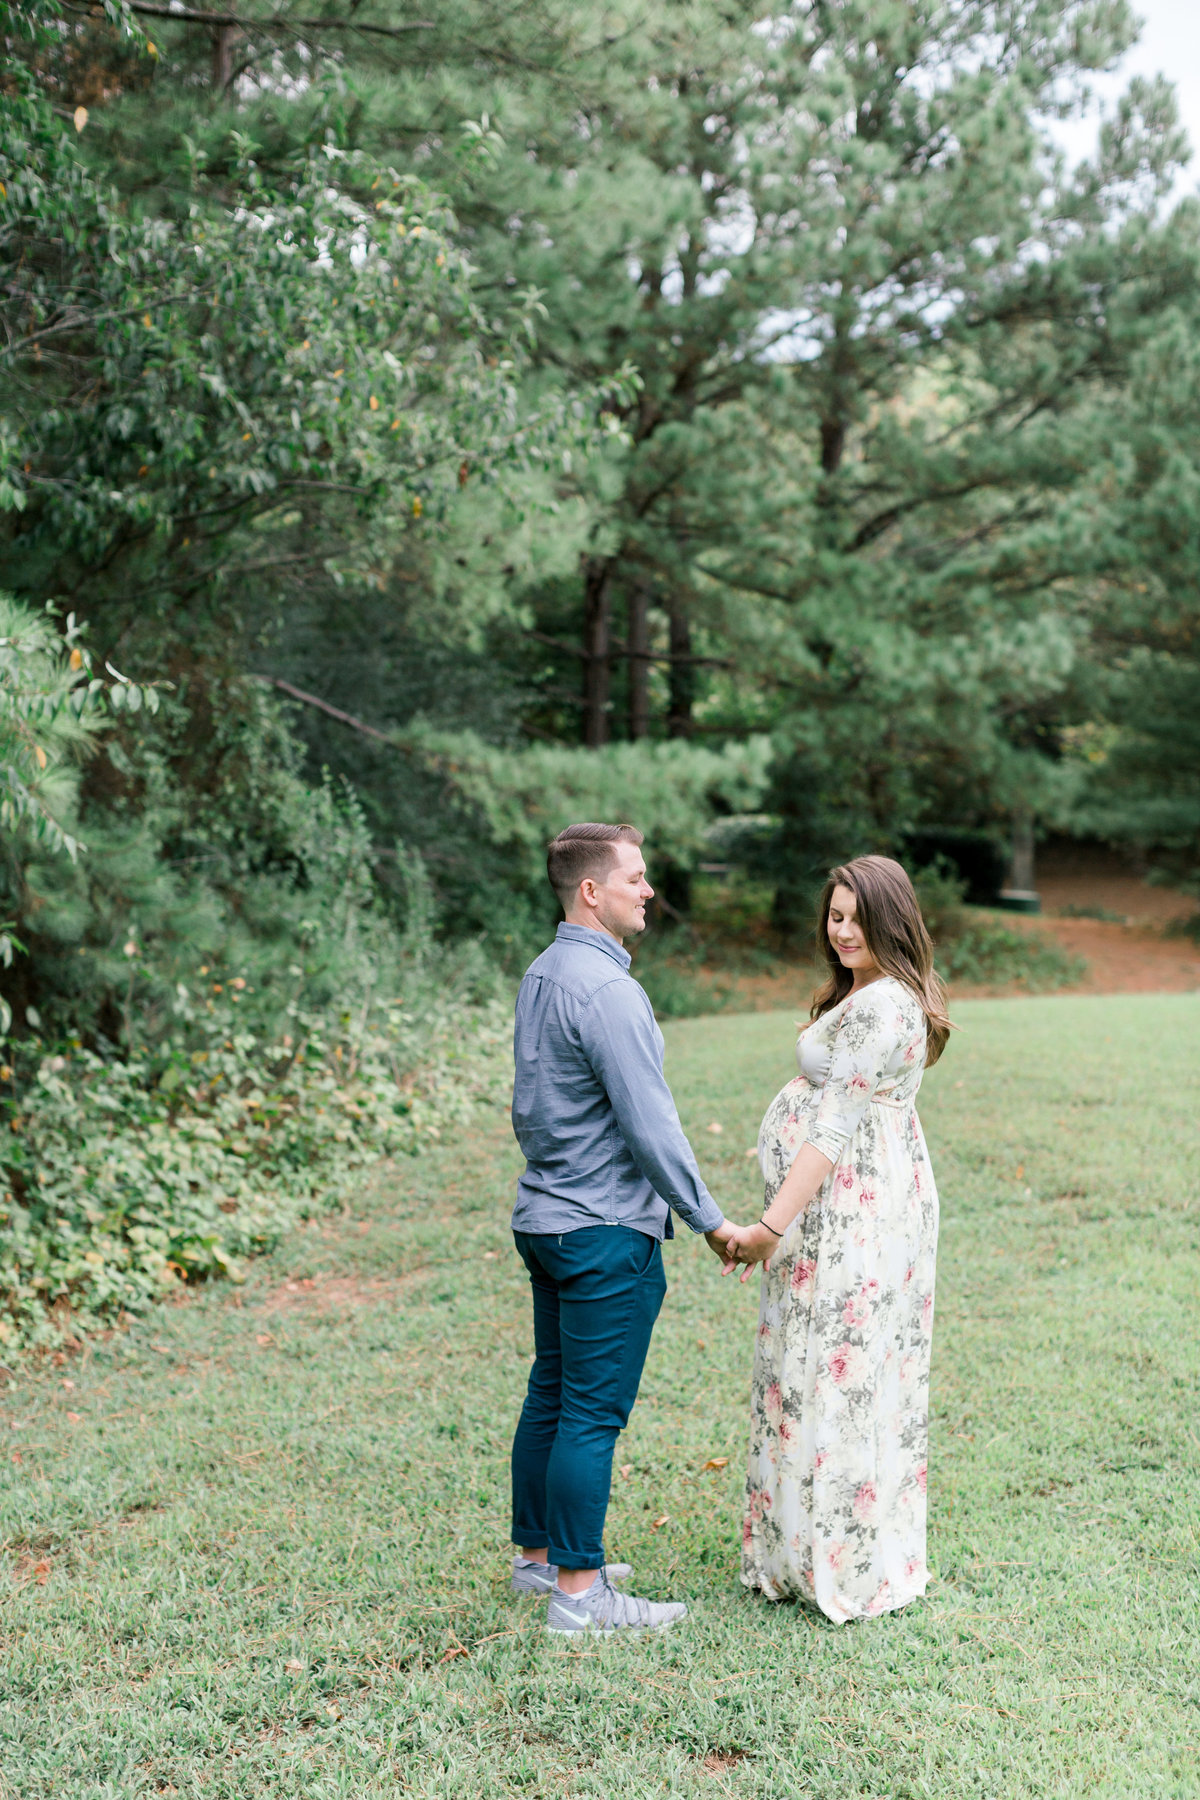 Dave and Emily-Maternity Session-Samantha Laffoon Photography-49